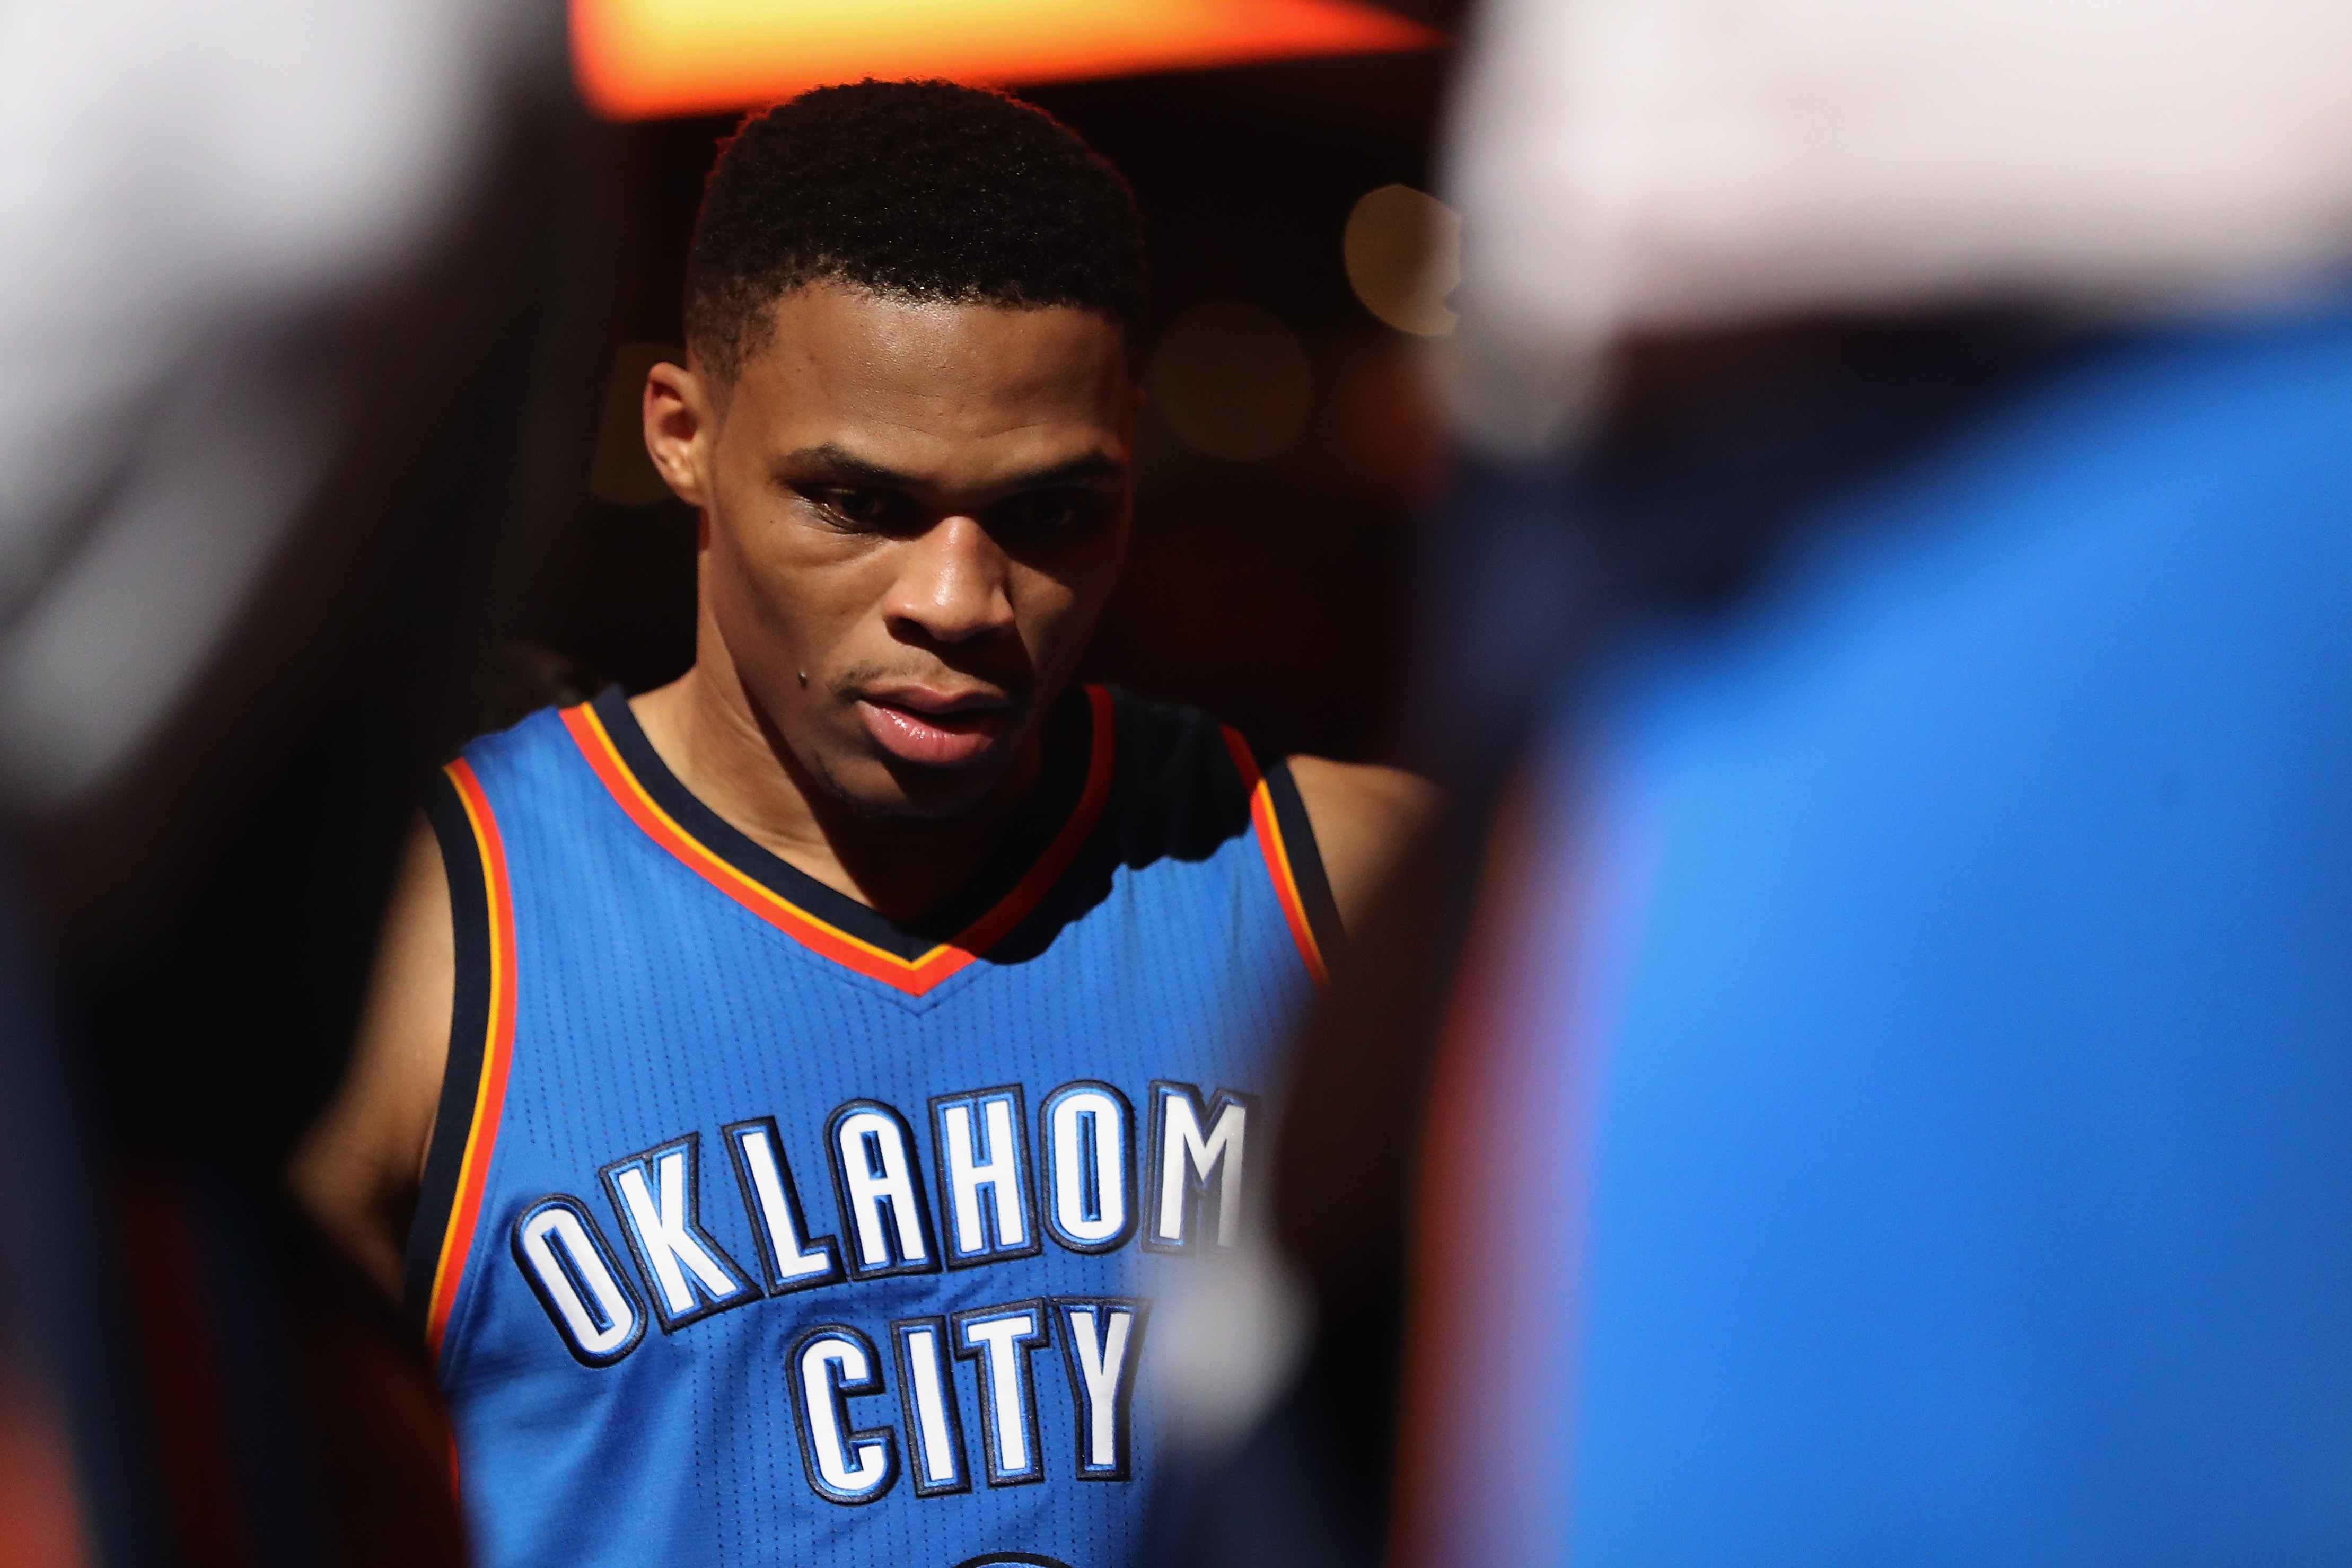 Russell Westbrook's jersey one of highest selling among NBA players